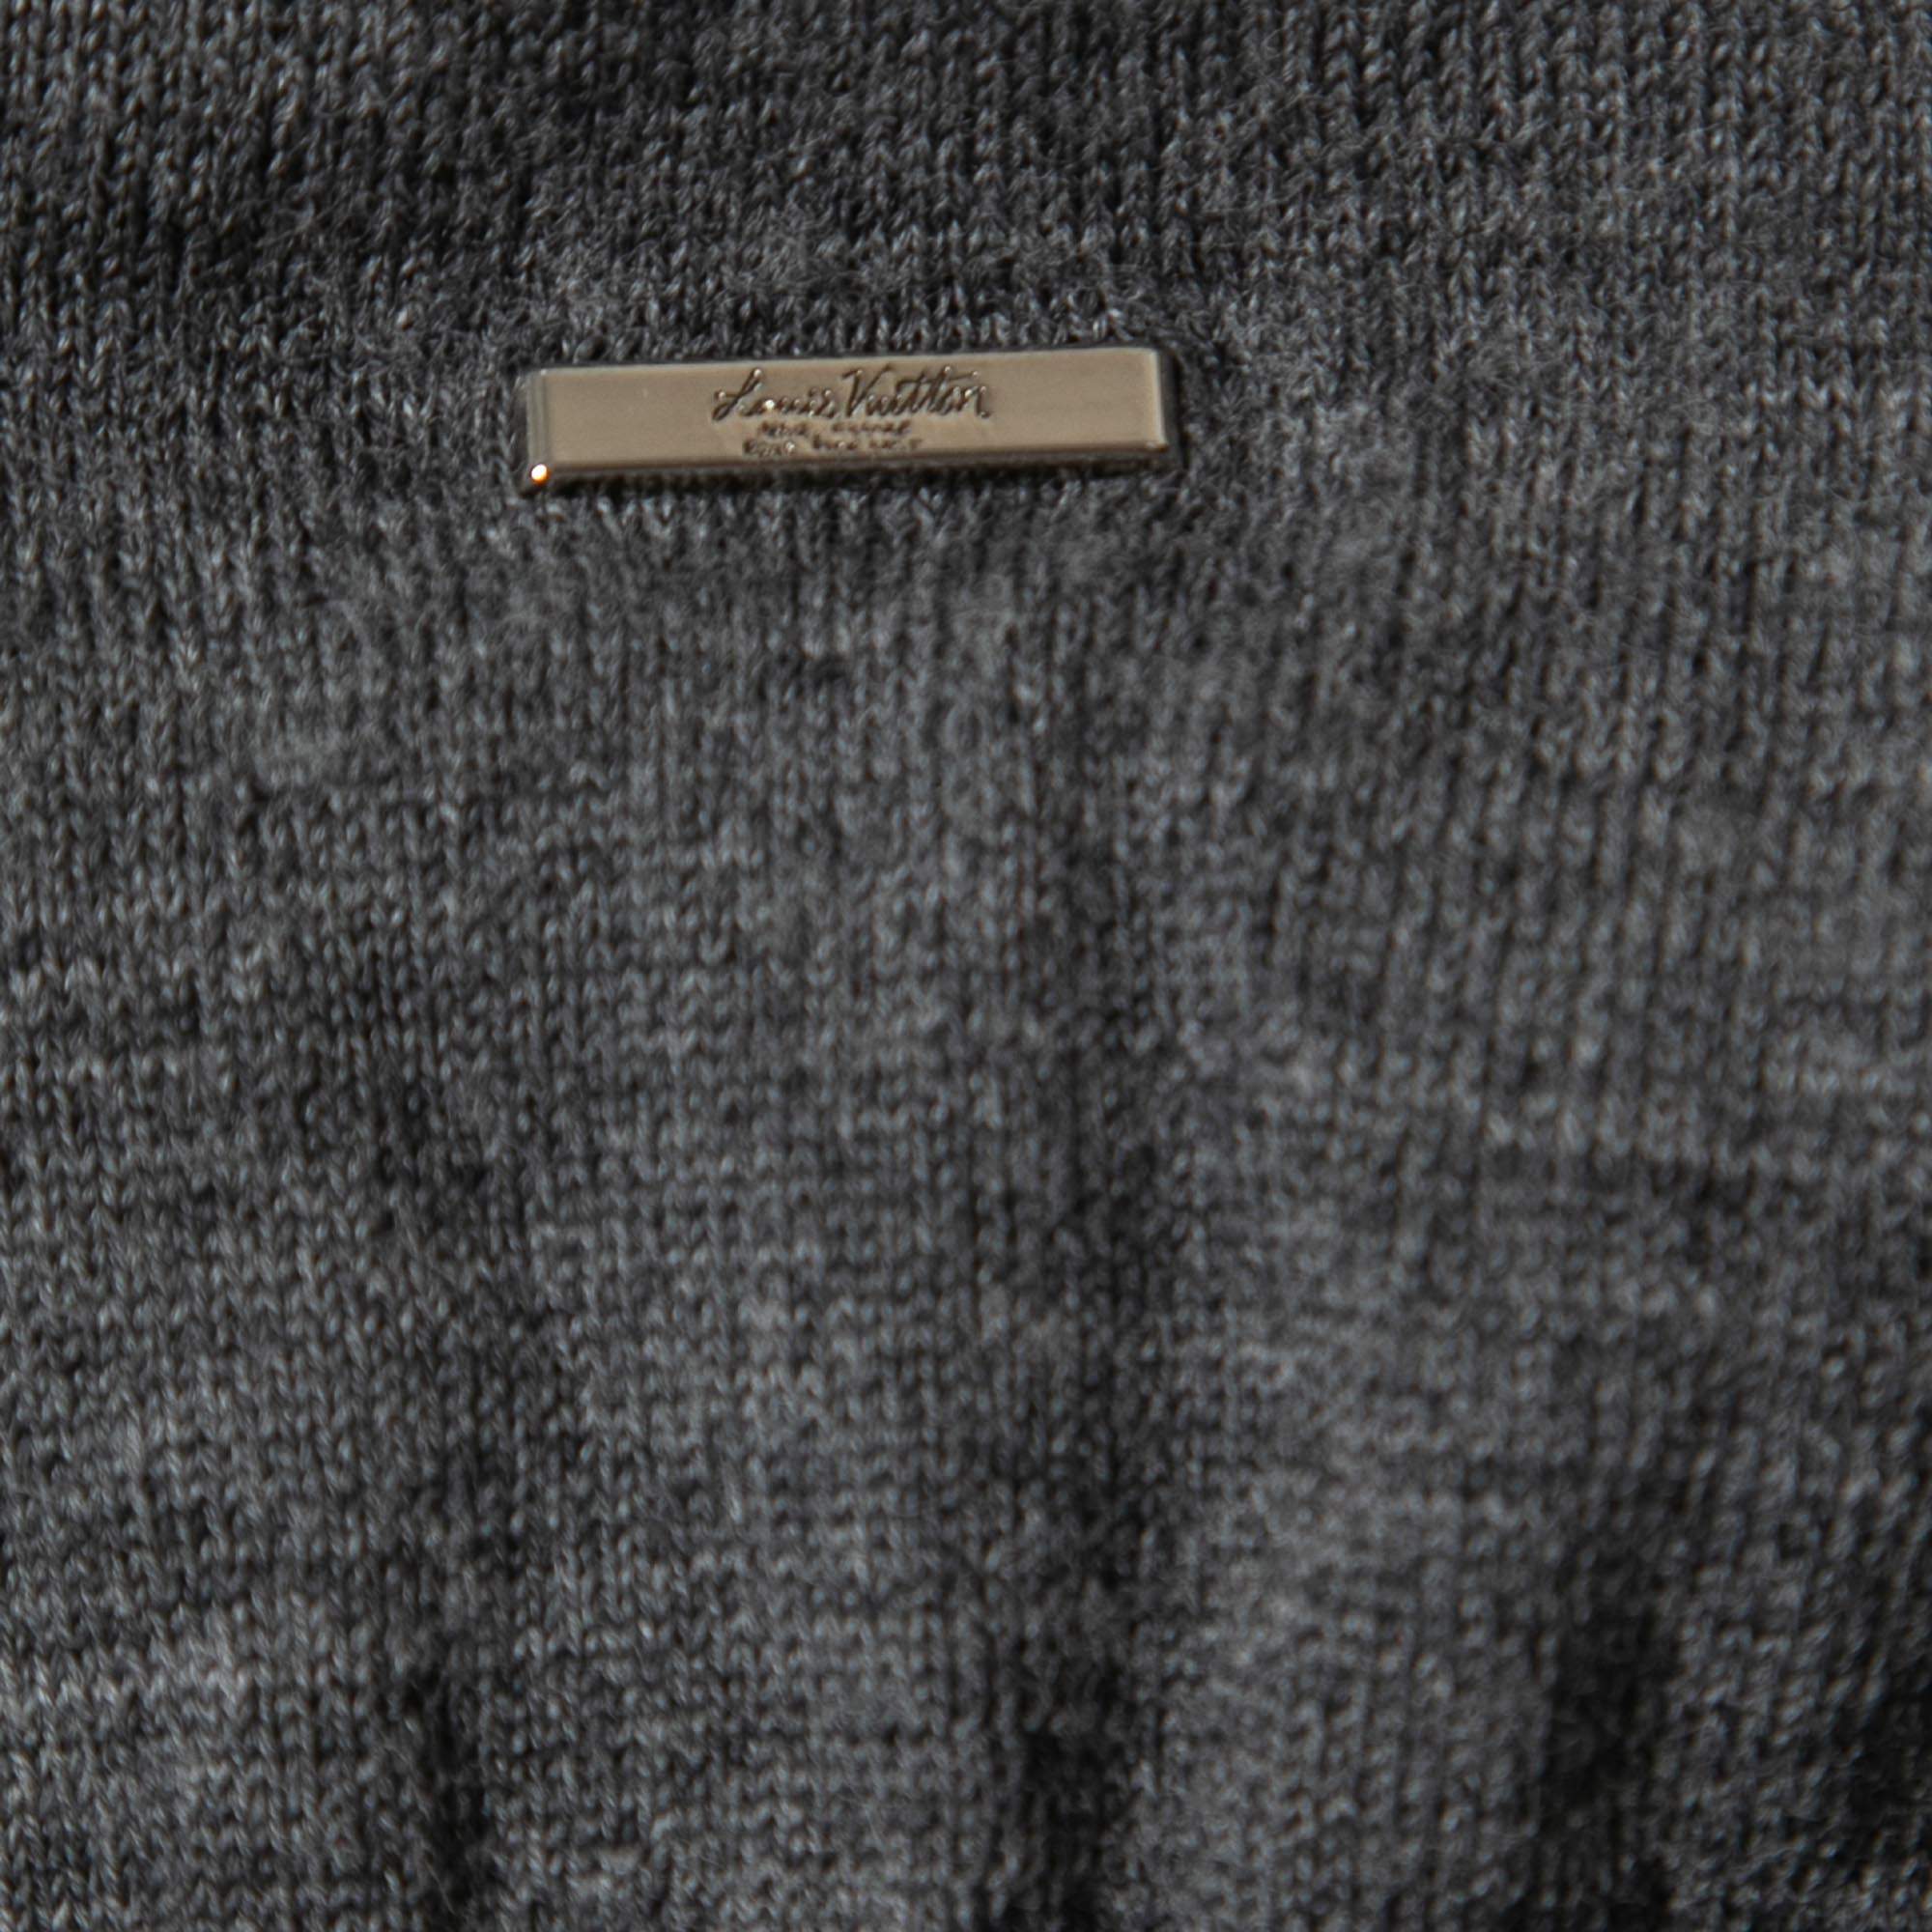 Louis Vuitton Grey Wool Knit Leather Trimmed Crew Neck Jumper S